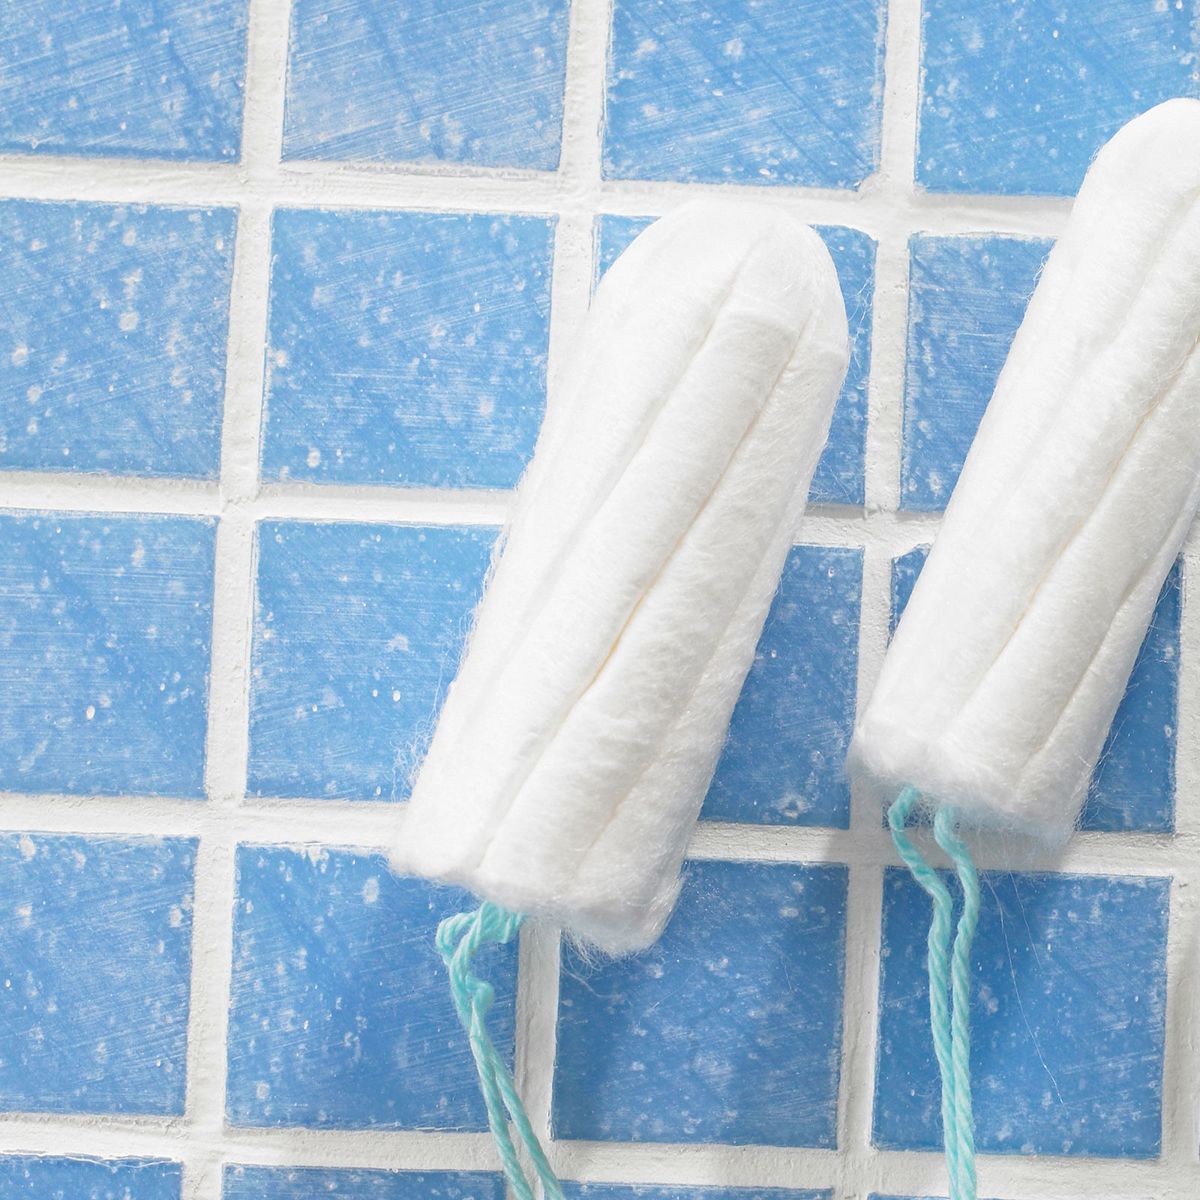 Tampons: cause for concern?